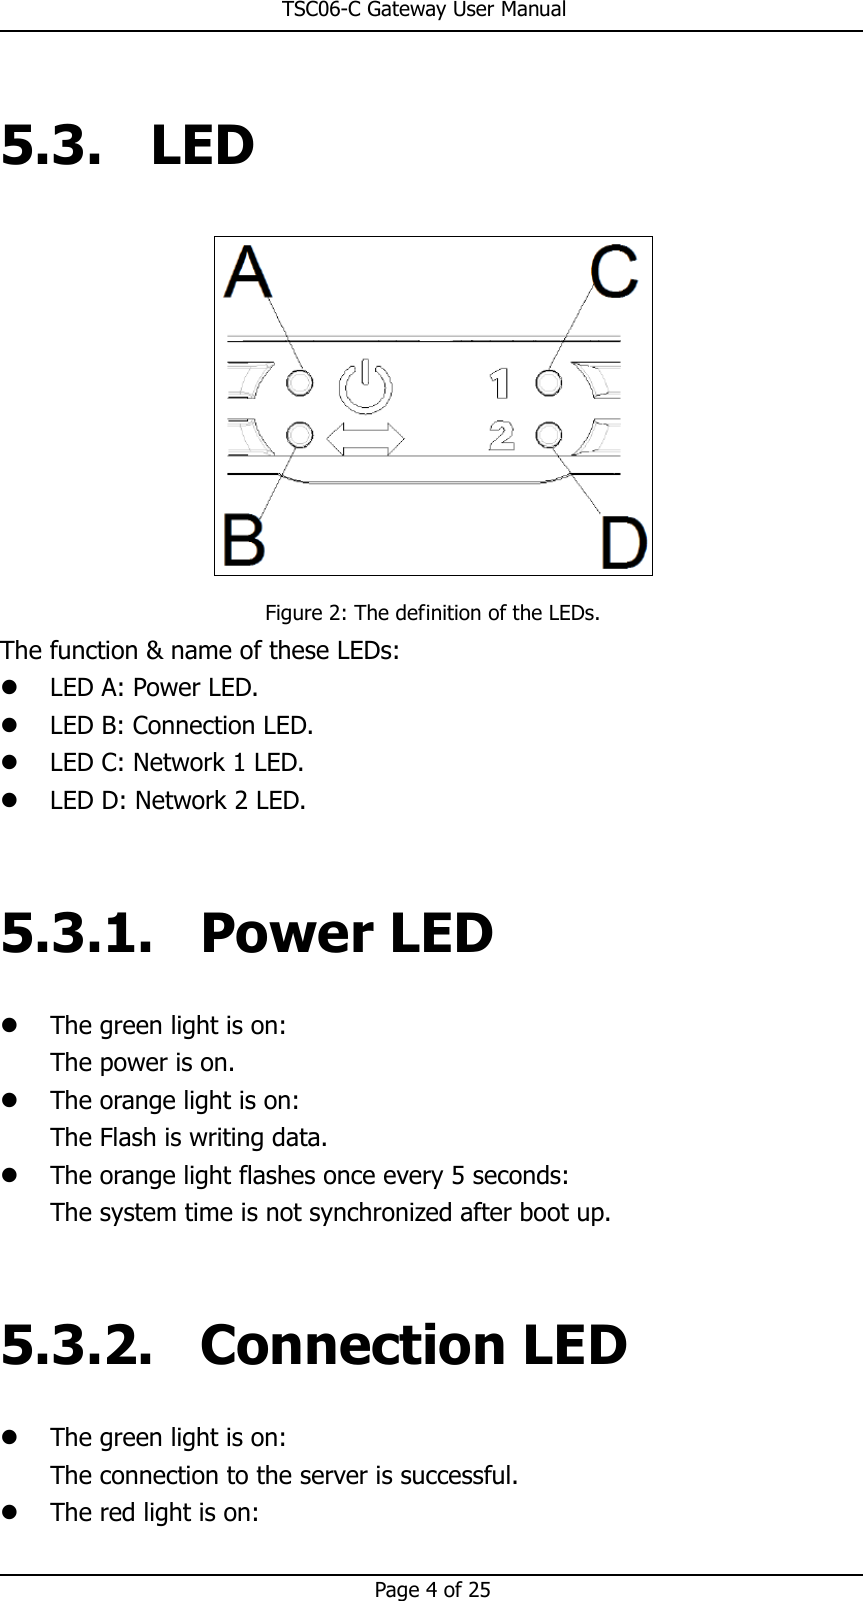                                                       TSC06-C Gateway User Manual   Page 4 of 25  5.3. LED  Figure 2: The definition of the LEDs. The function &amp; name of these LEDs:  LED A: Power LED.  LED B: Connection LED.  LED C: Network 1 LED.  LED D: Network 2 LED.  5.3.1. Power LED  The green light is on: The power is on.  The orange light is on: The Flash is writing data.  The orange light flashes once every 5 seconds: The system time is not synchronized after boot up.  5.3.2. Connection LED  The green light is on: The connection to the server is successful.  The red light is on: 